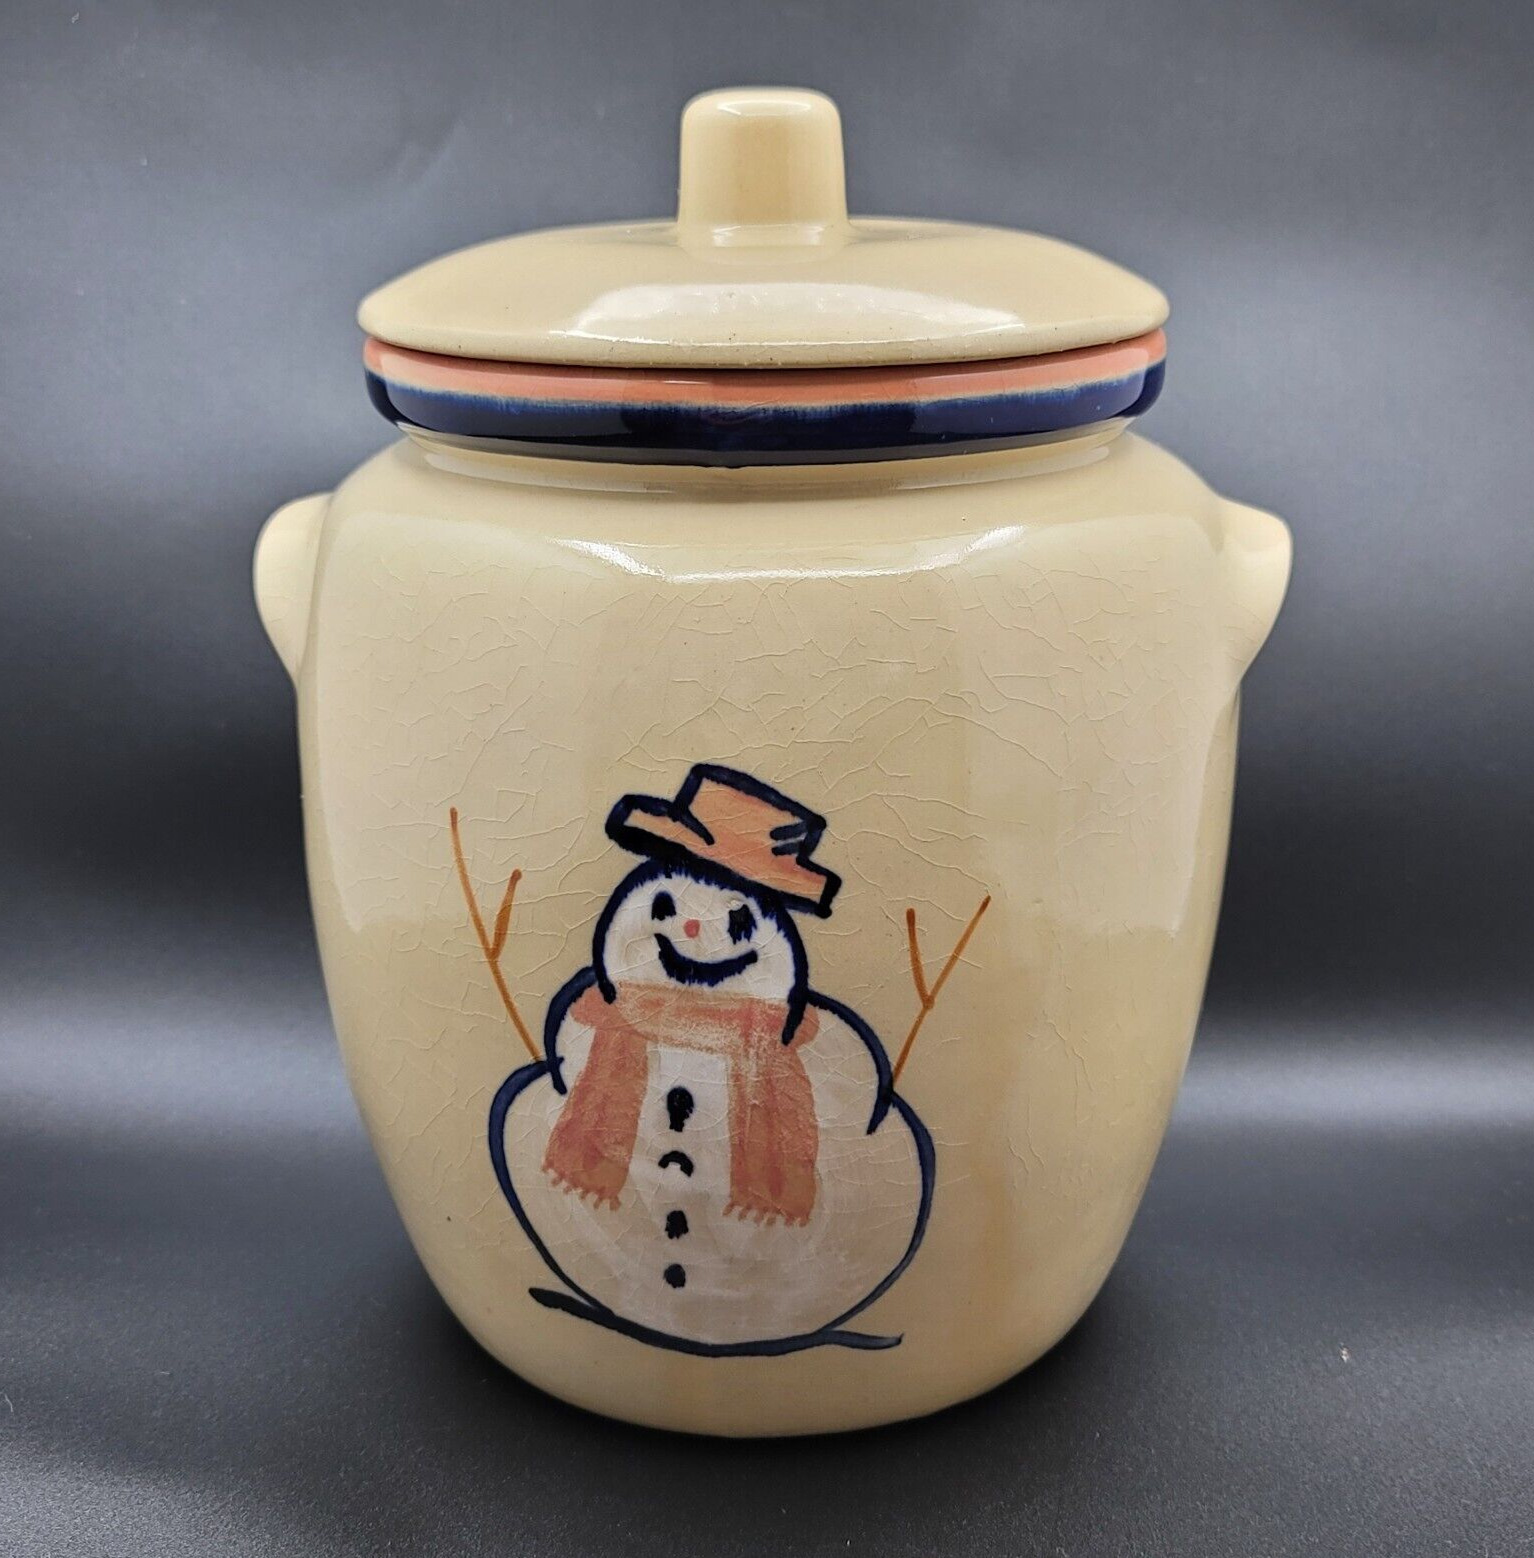 Vintage SNOWMAN COOKIE JAR by RRPCo Robinson-Ransbottom Pottery Roseville, Ohio